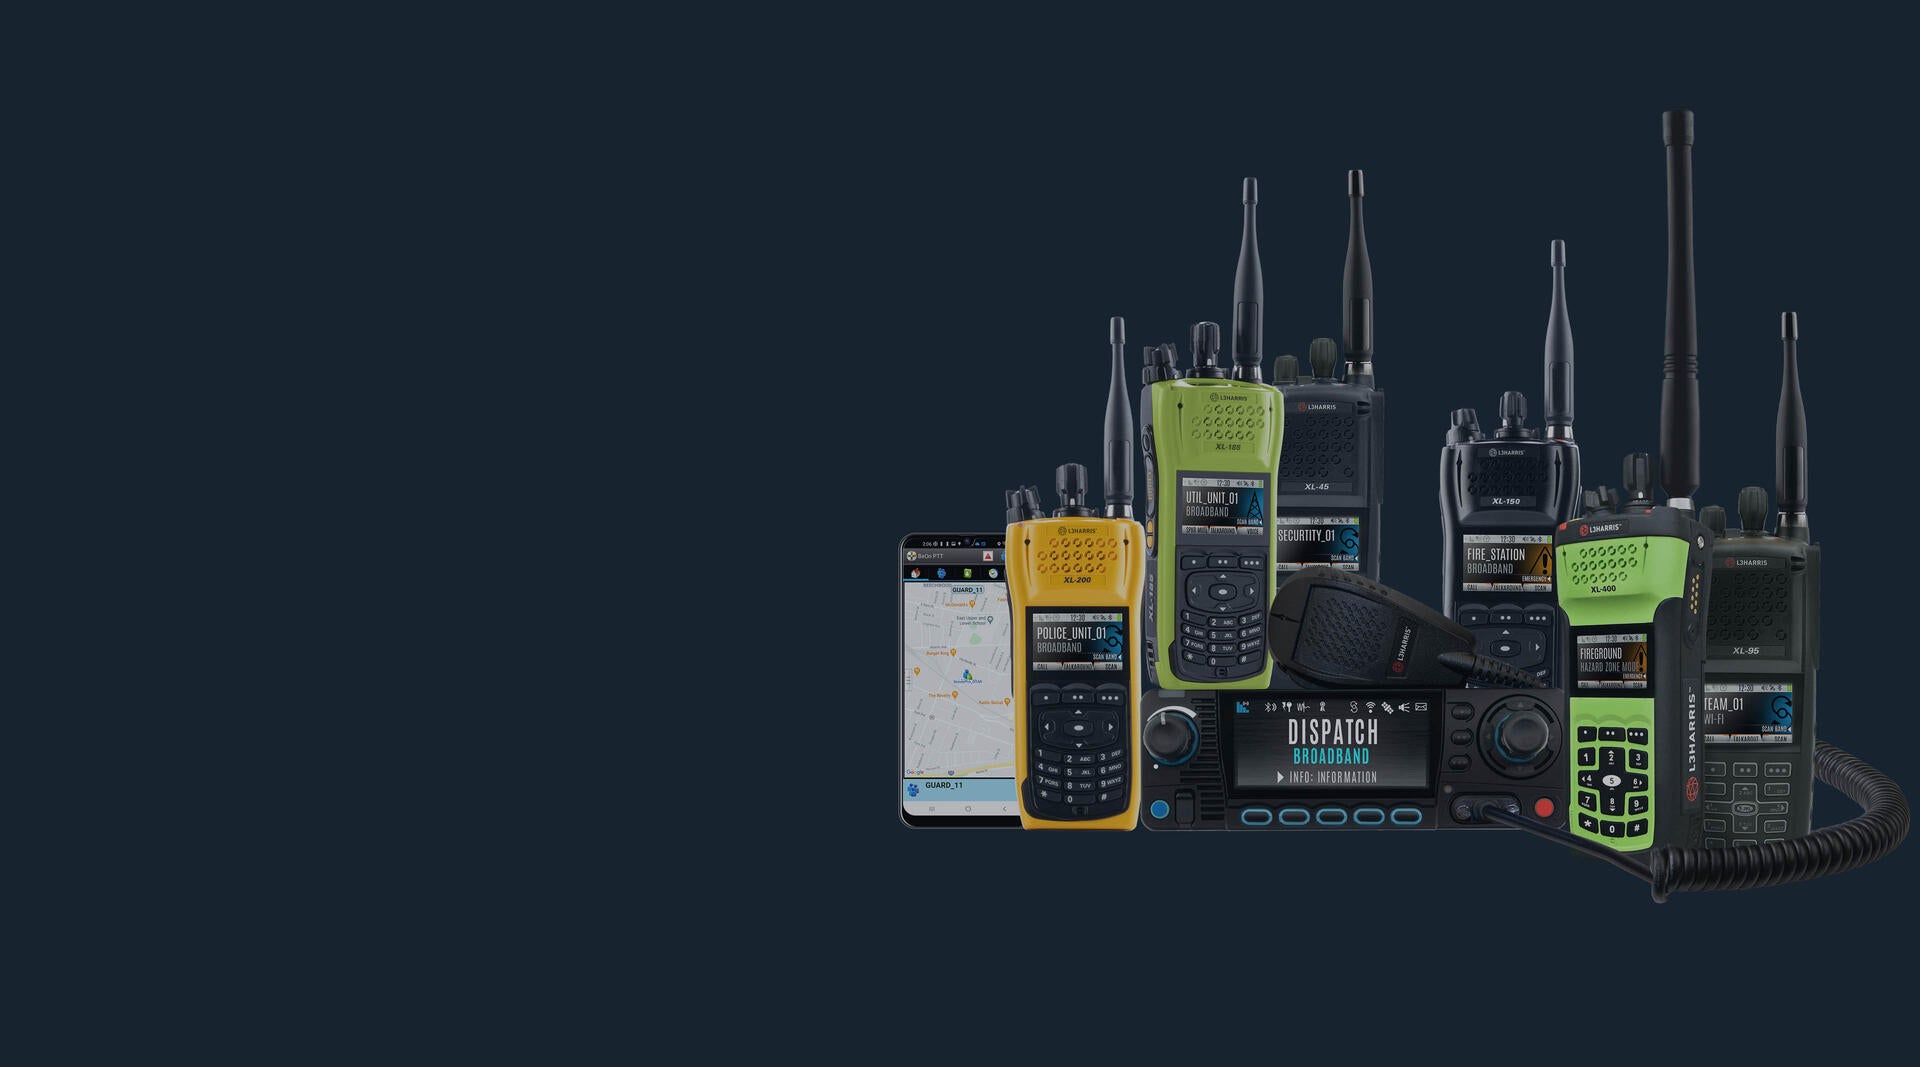 XL Series of interoperable public safety communications solutions